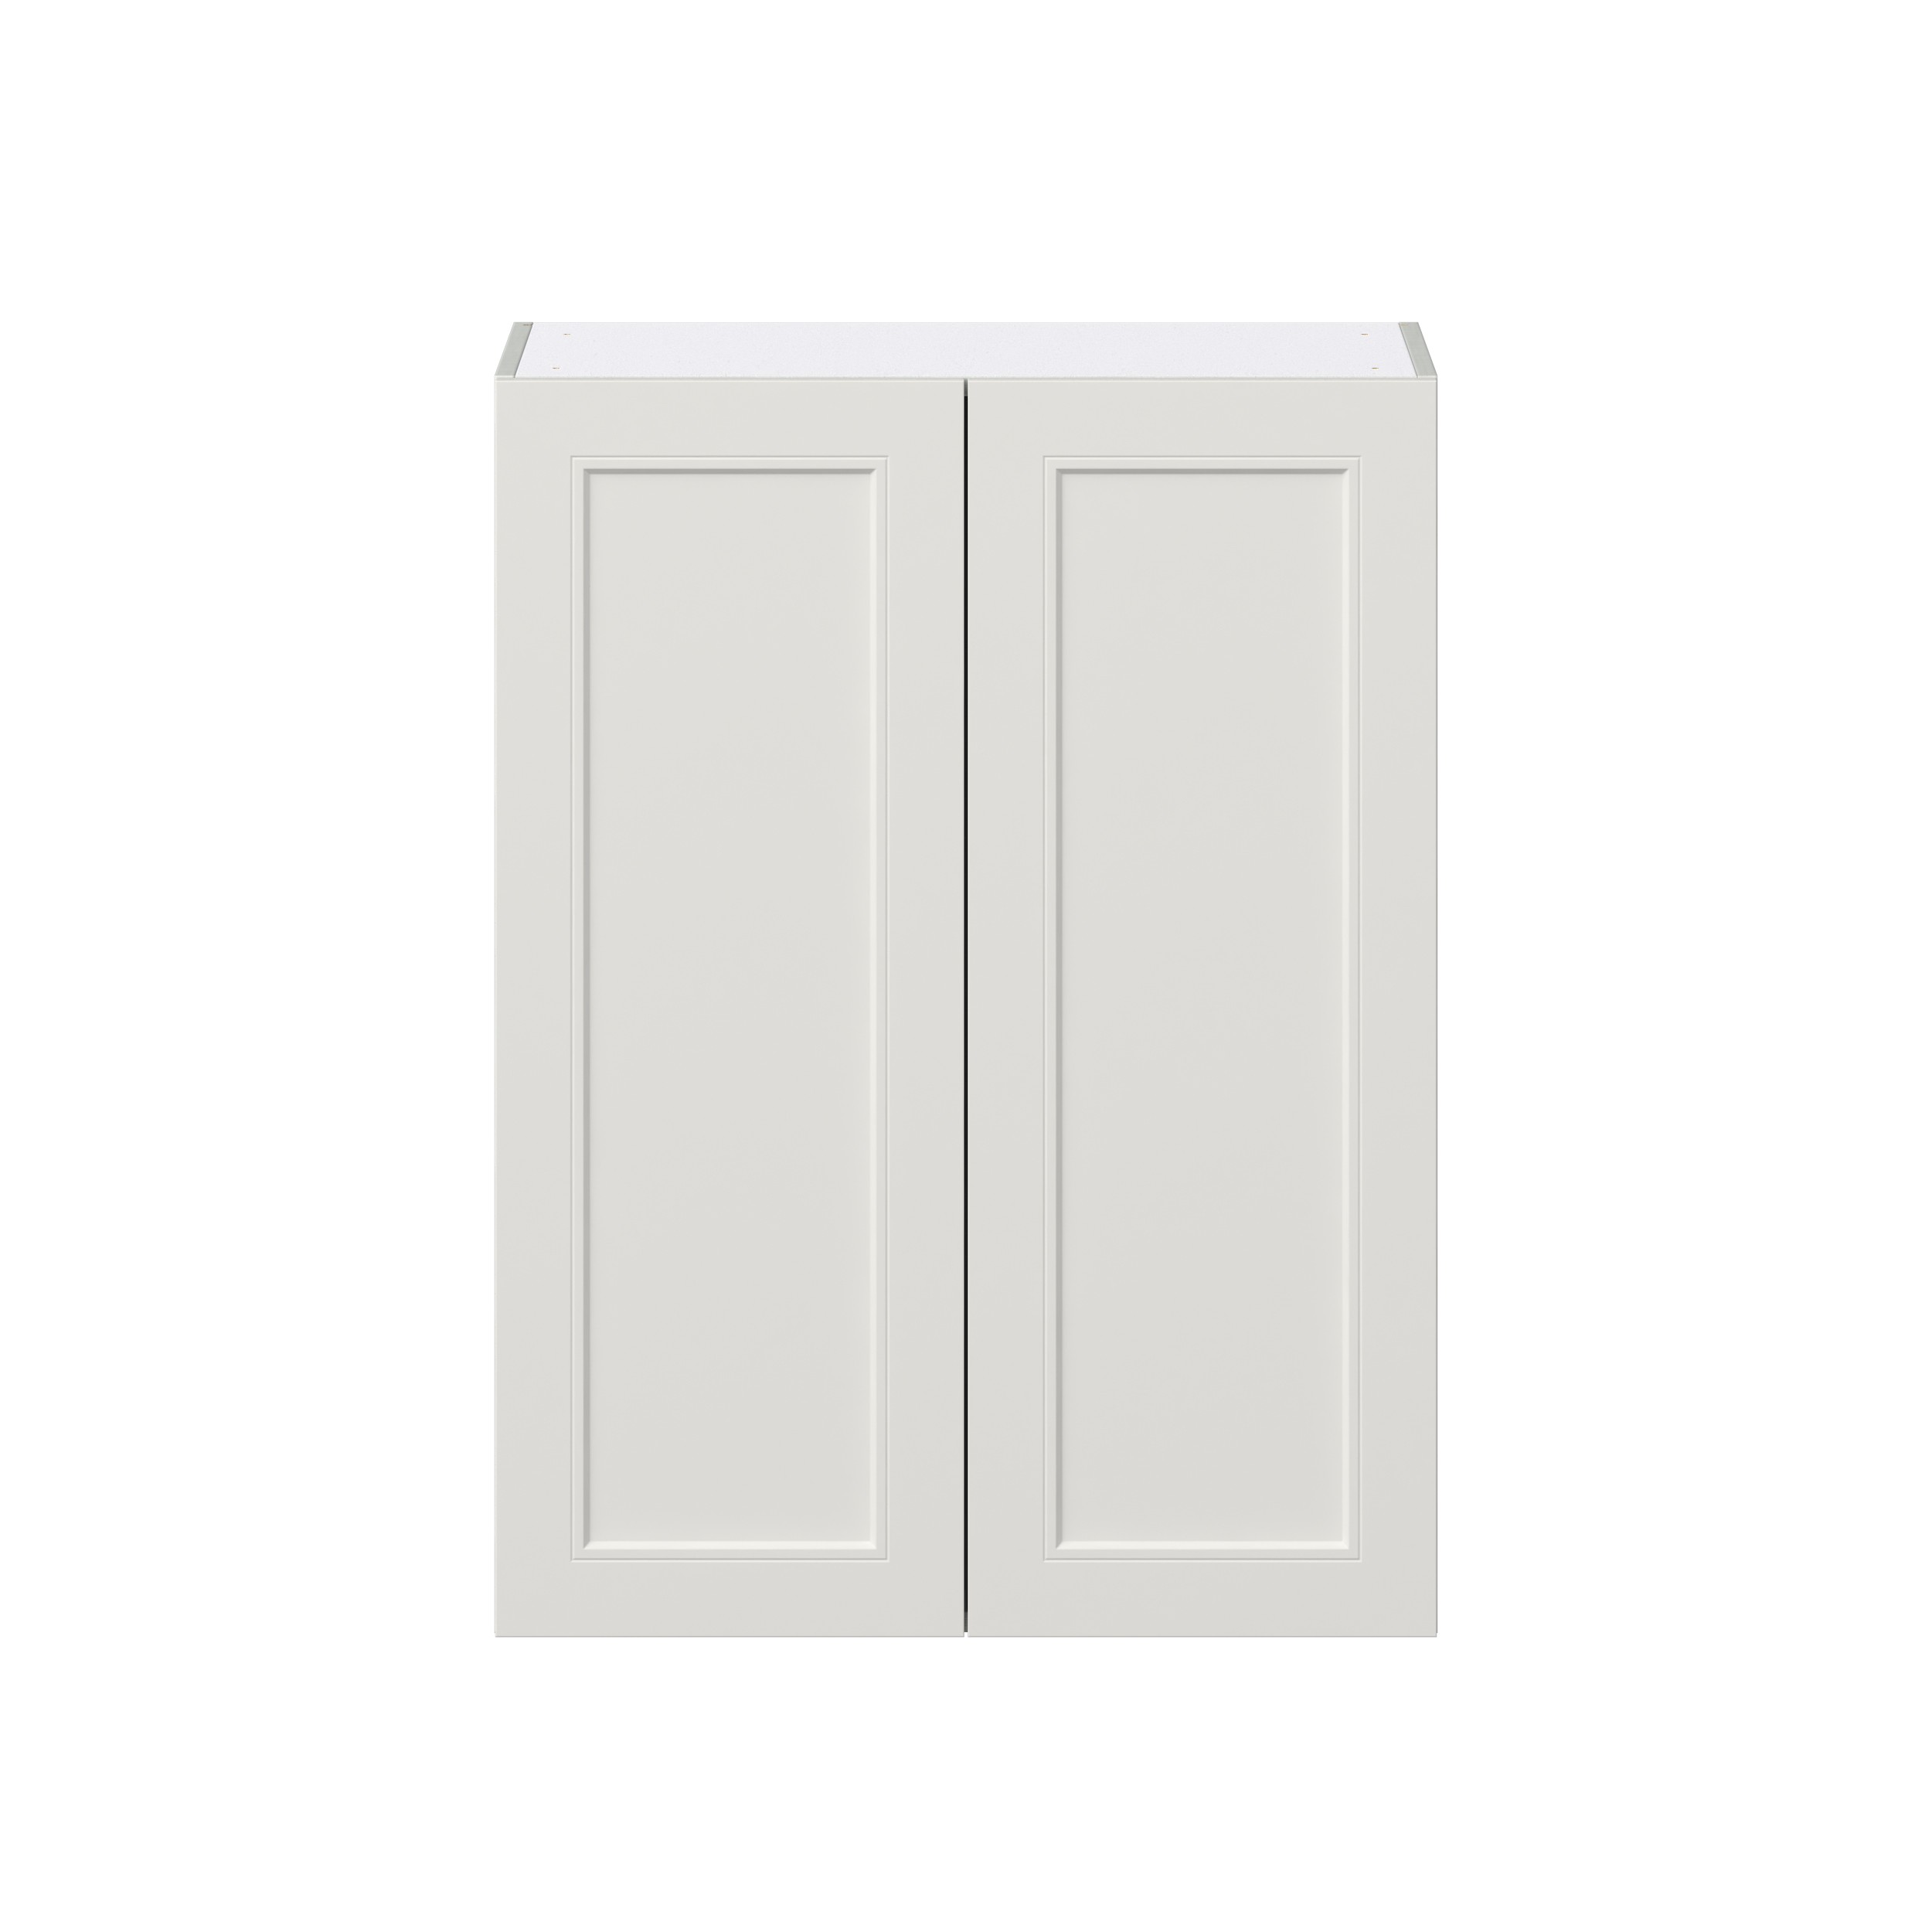 Wisteria Painted Light Gray Recessed Assembled Wall Cabinet with 2 Full High Doors (30 in. W x 40 in. H x 14 in. D)